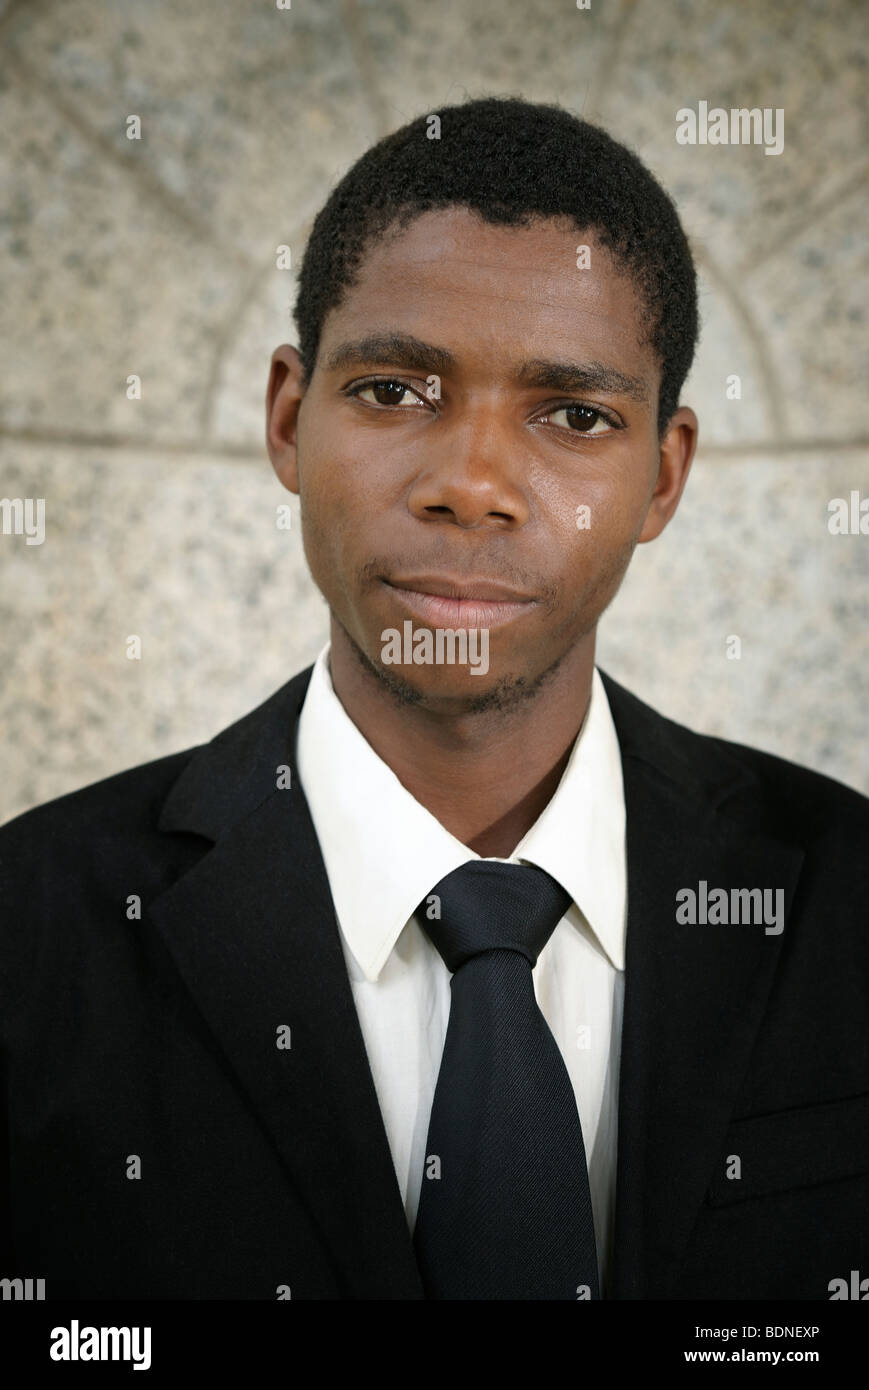 Portrait of young black man wearing full suit, Cape Town, Western Cape Province, South Africa Stock Photo